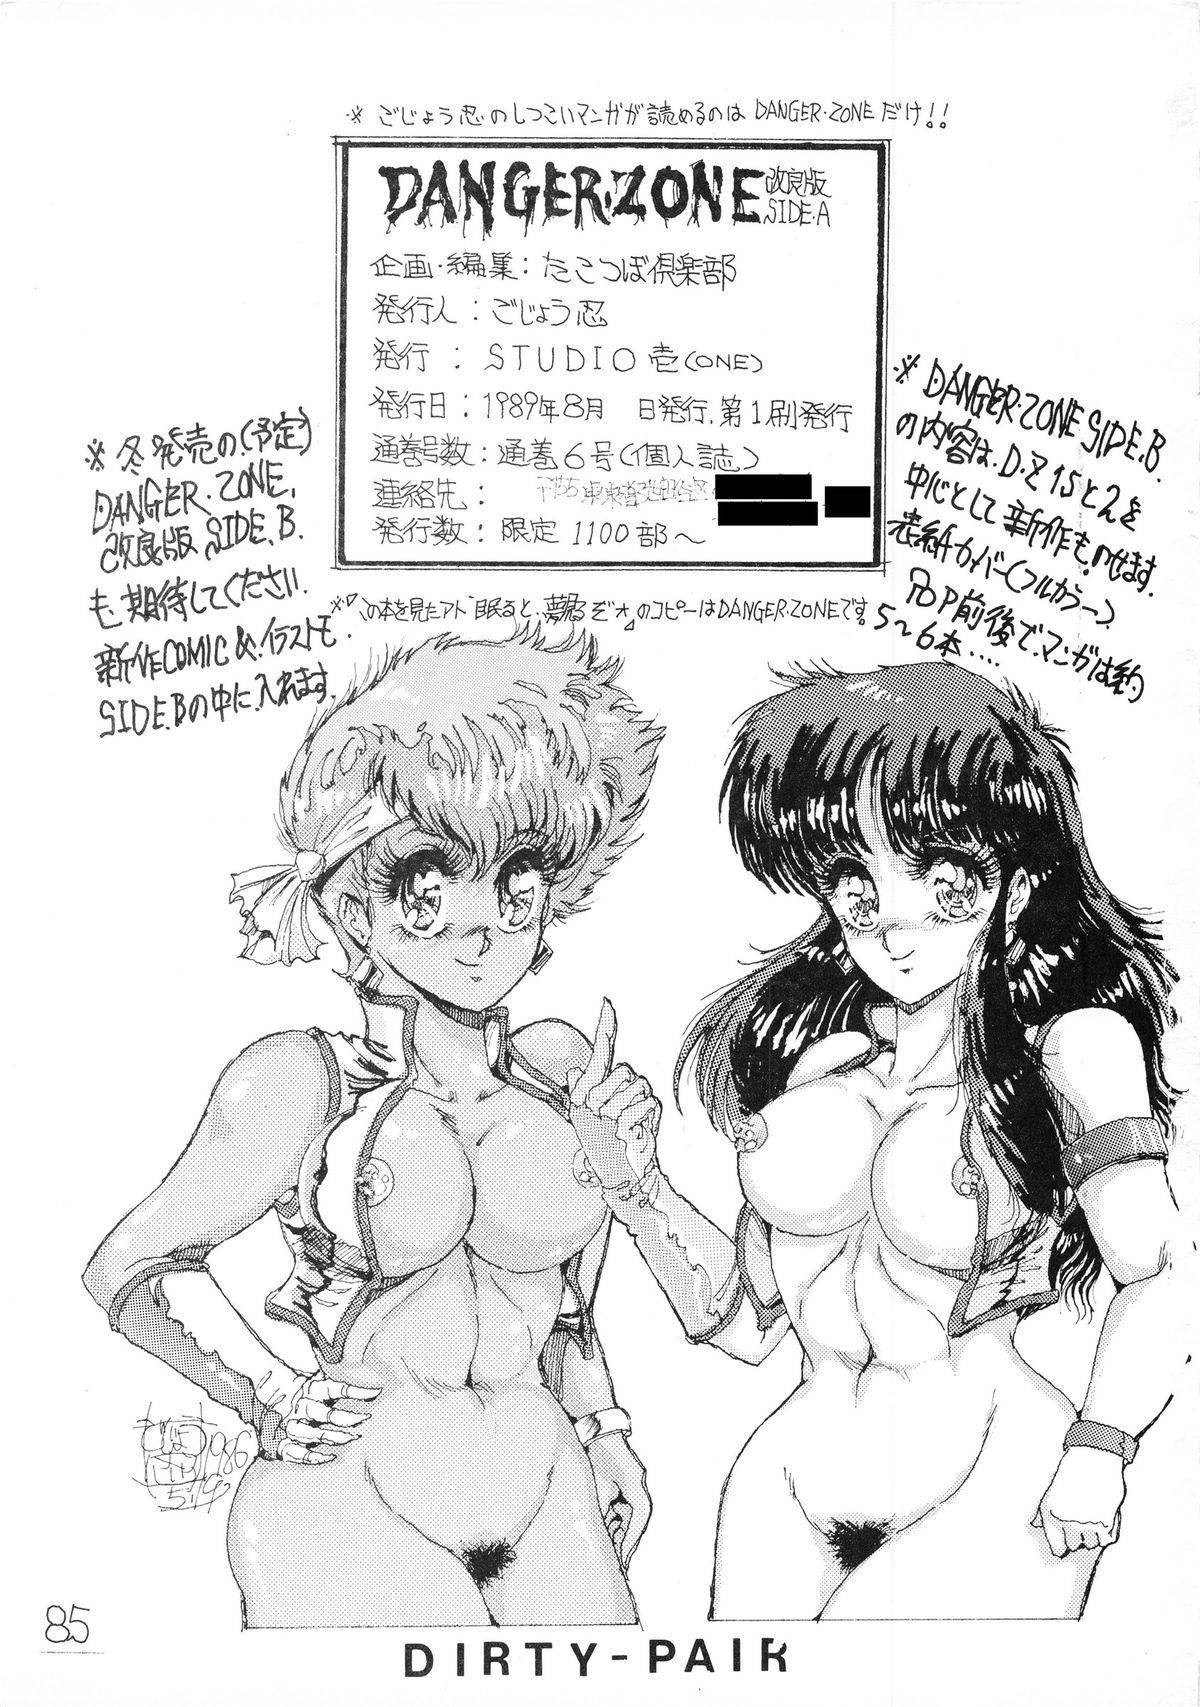 Polla DANGER ZONE improved version SIDE A - Dirty pair Maison ikkoku Magical emi Kimagure orange road Perfect Body - Page 87